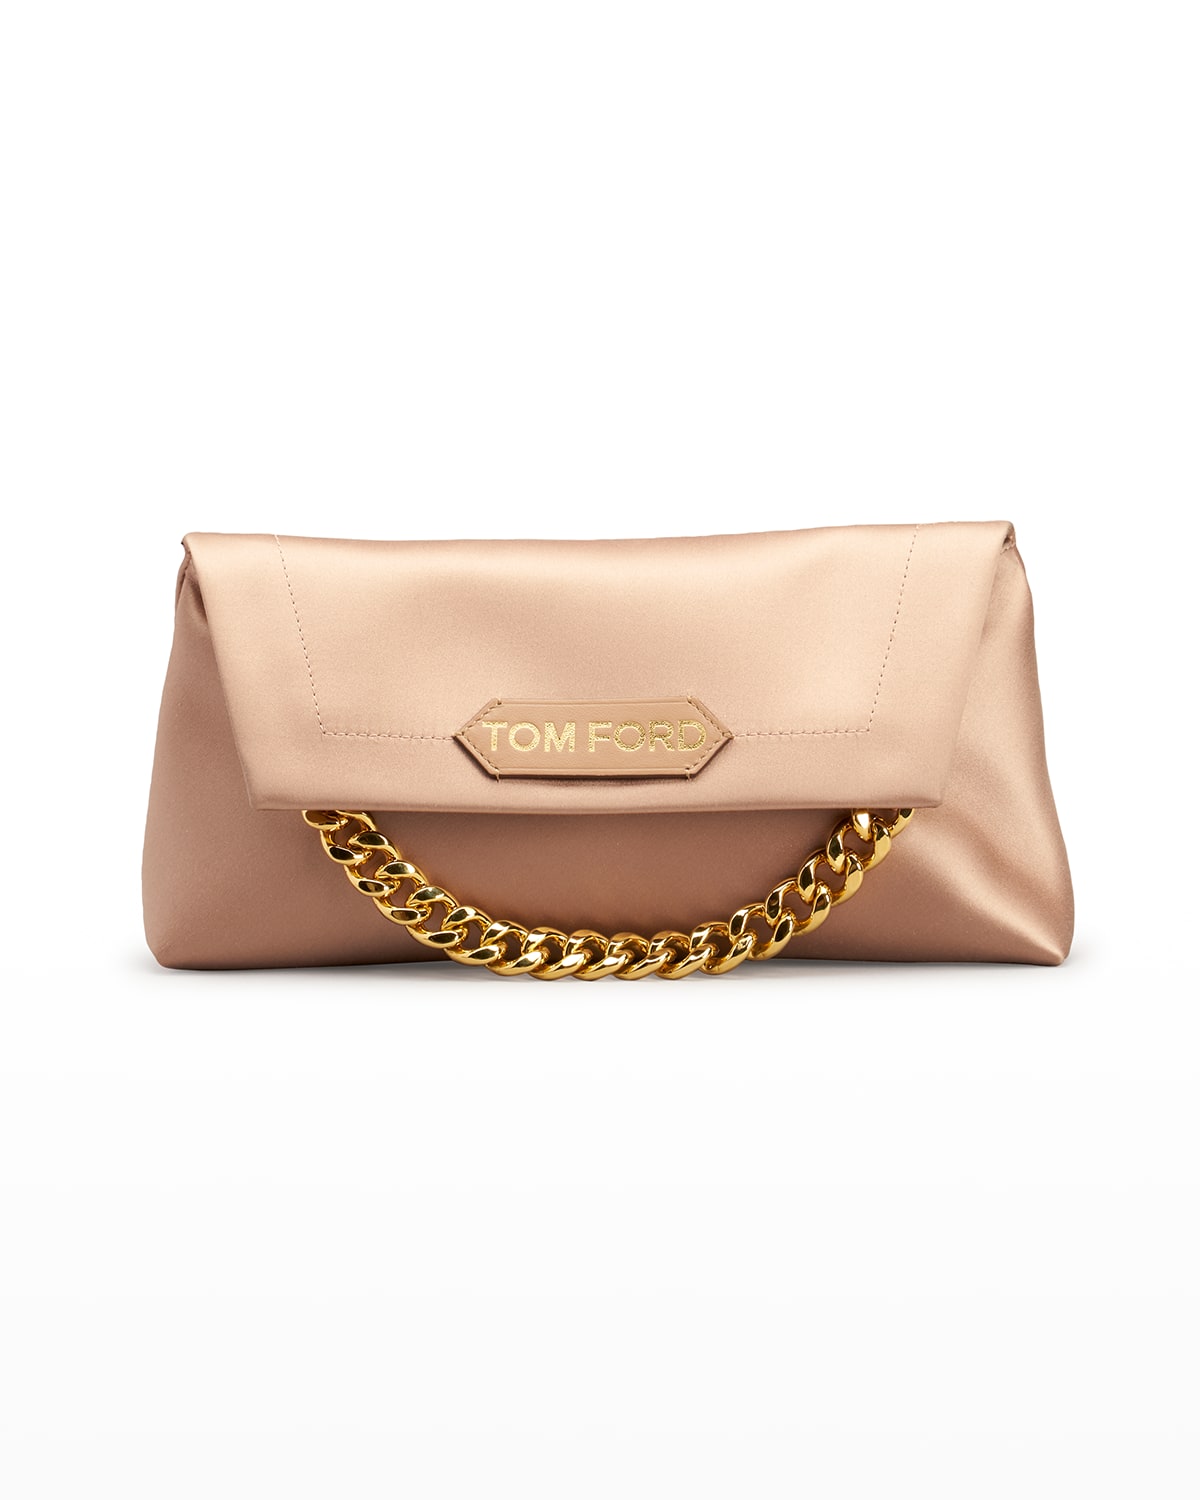 Tom Ford Kids' Small Satin Chain Clutch Bag In Blush Nude